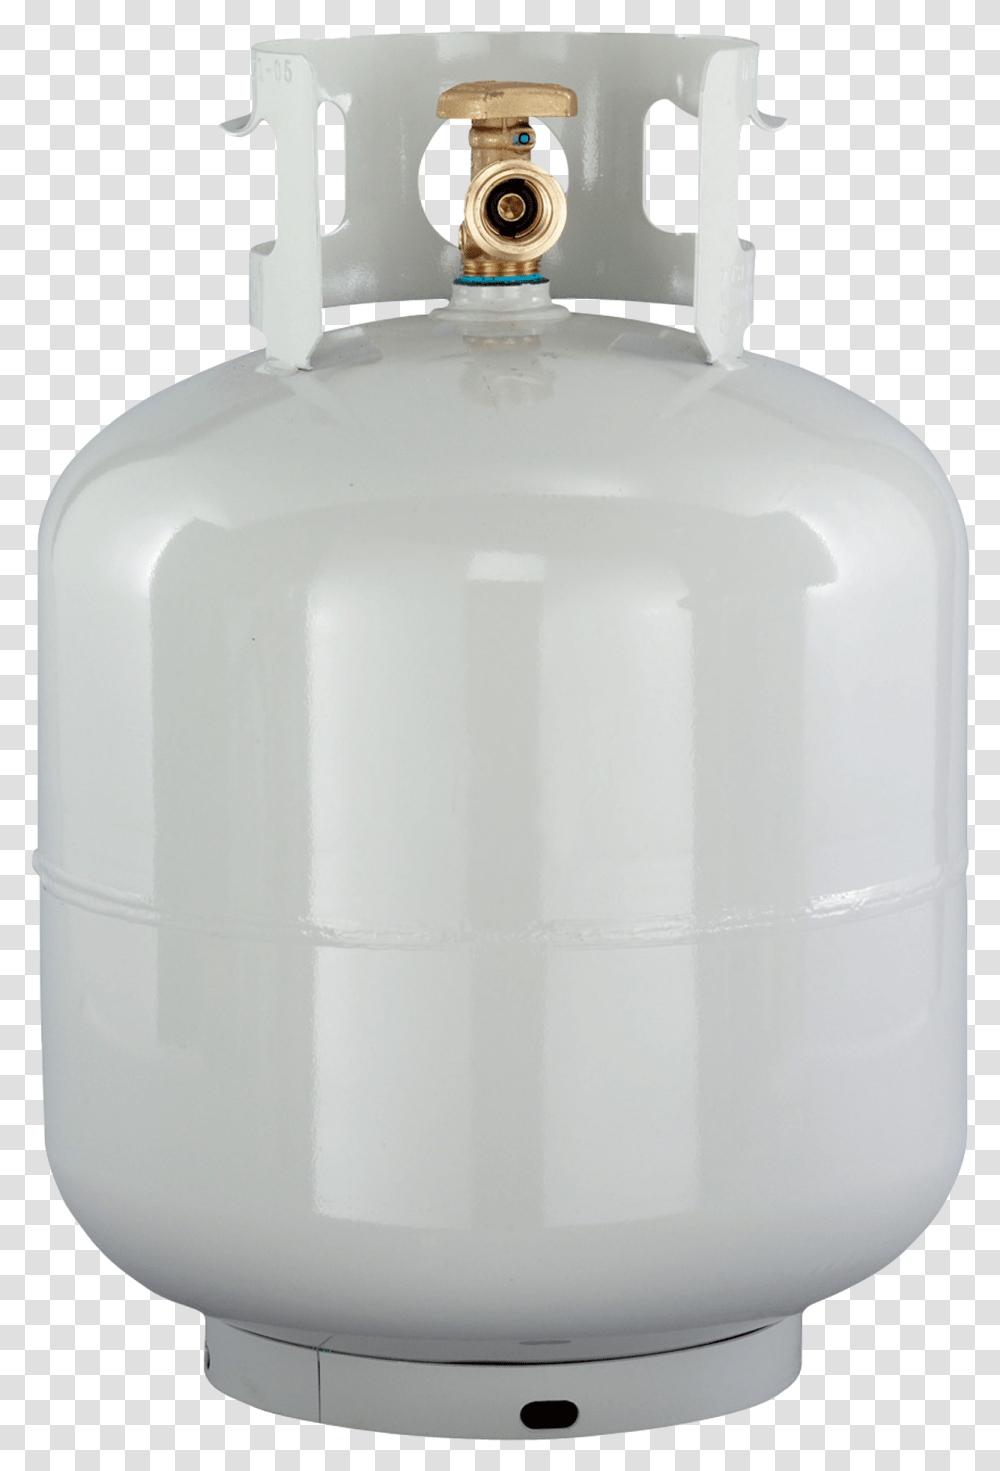 Water Tank Propane Tank King Of The Hill, Milk, Beverage, Drink, Cylinder Transparent Png